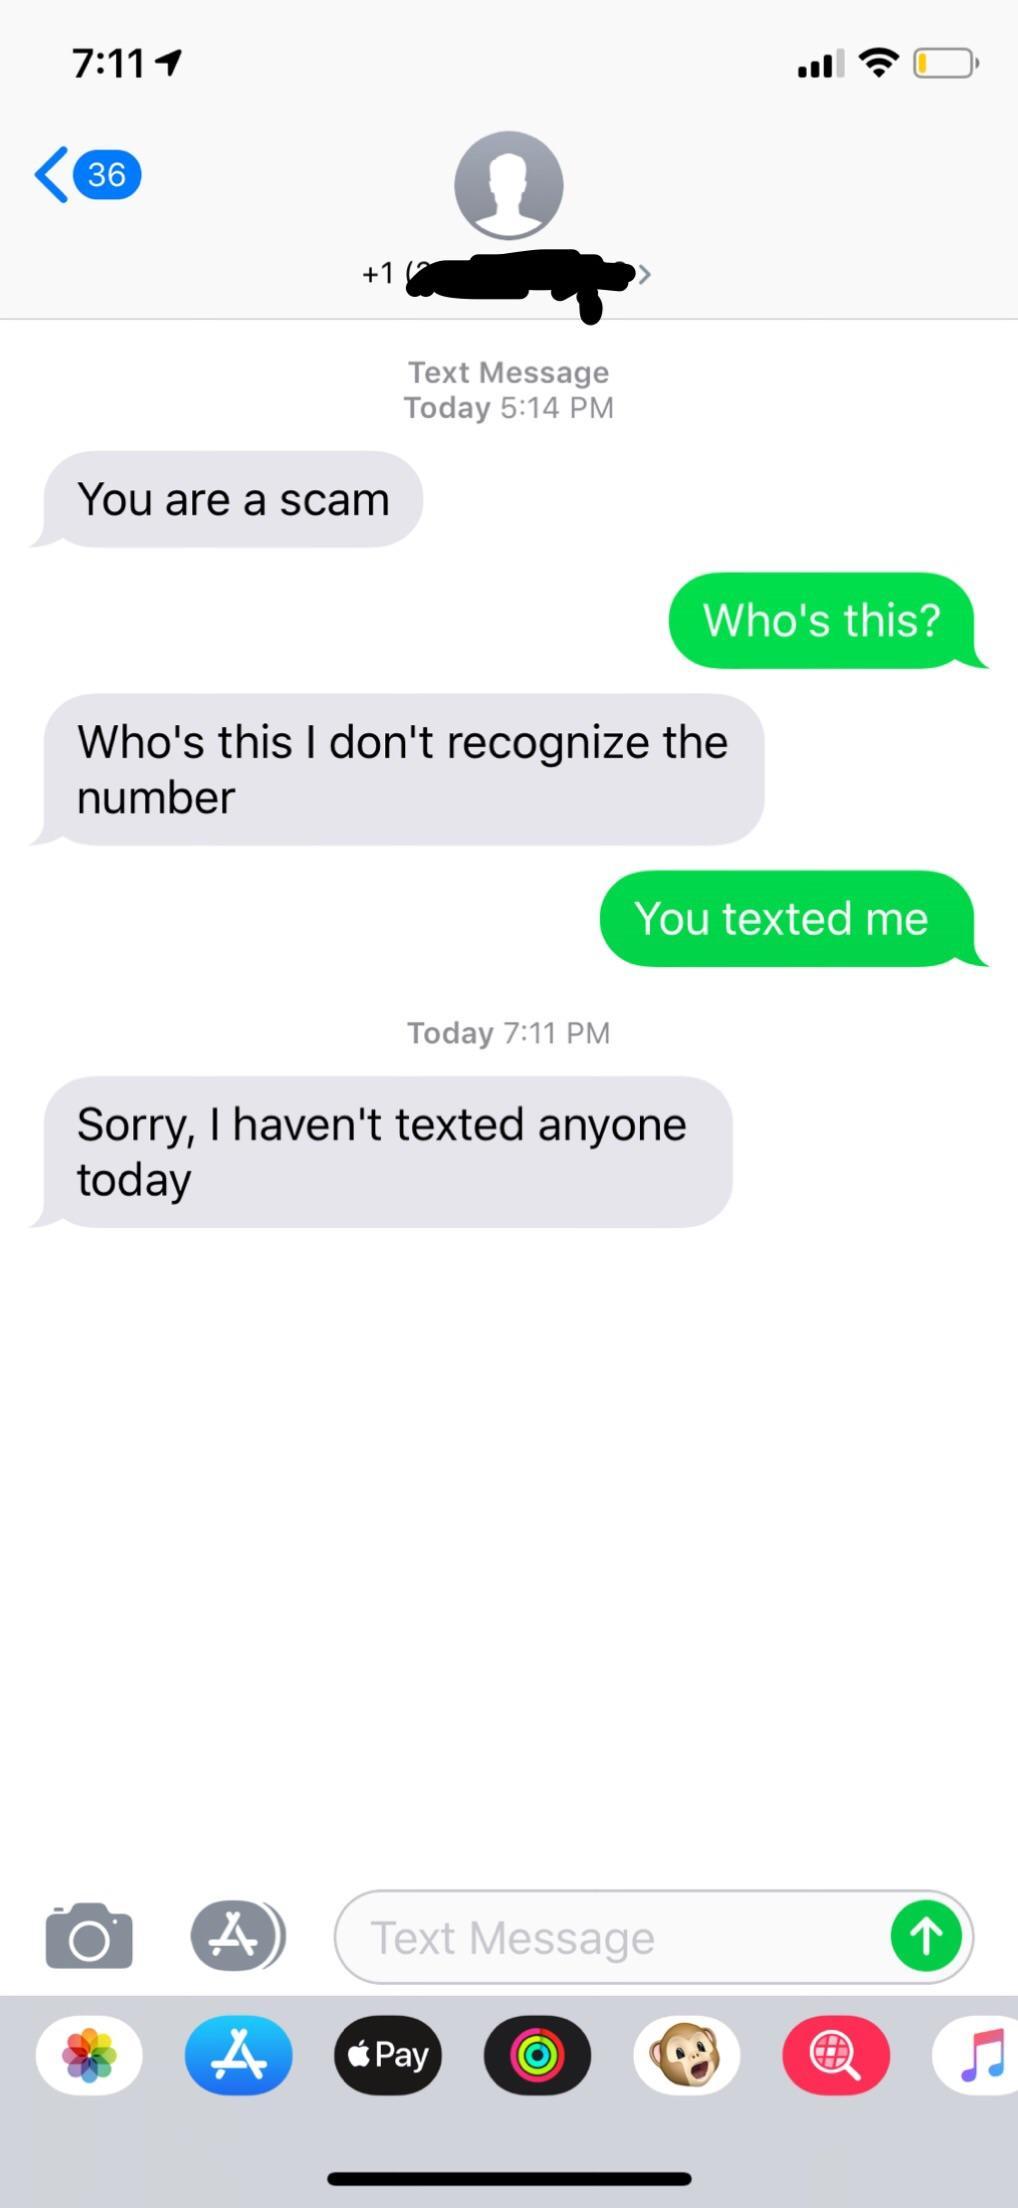 30 Times People Texted Crazy Stuff To The Wrong Number